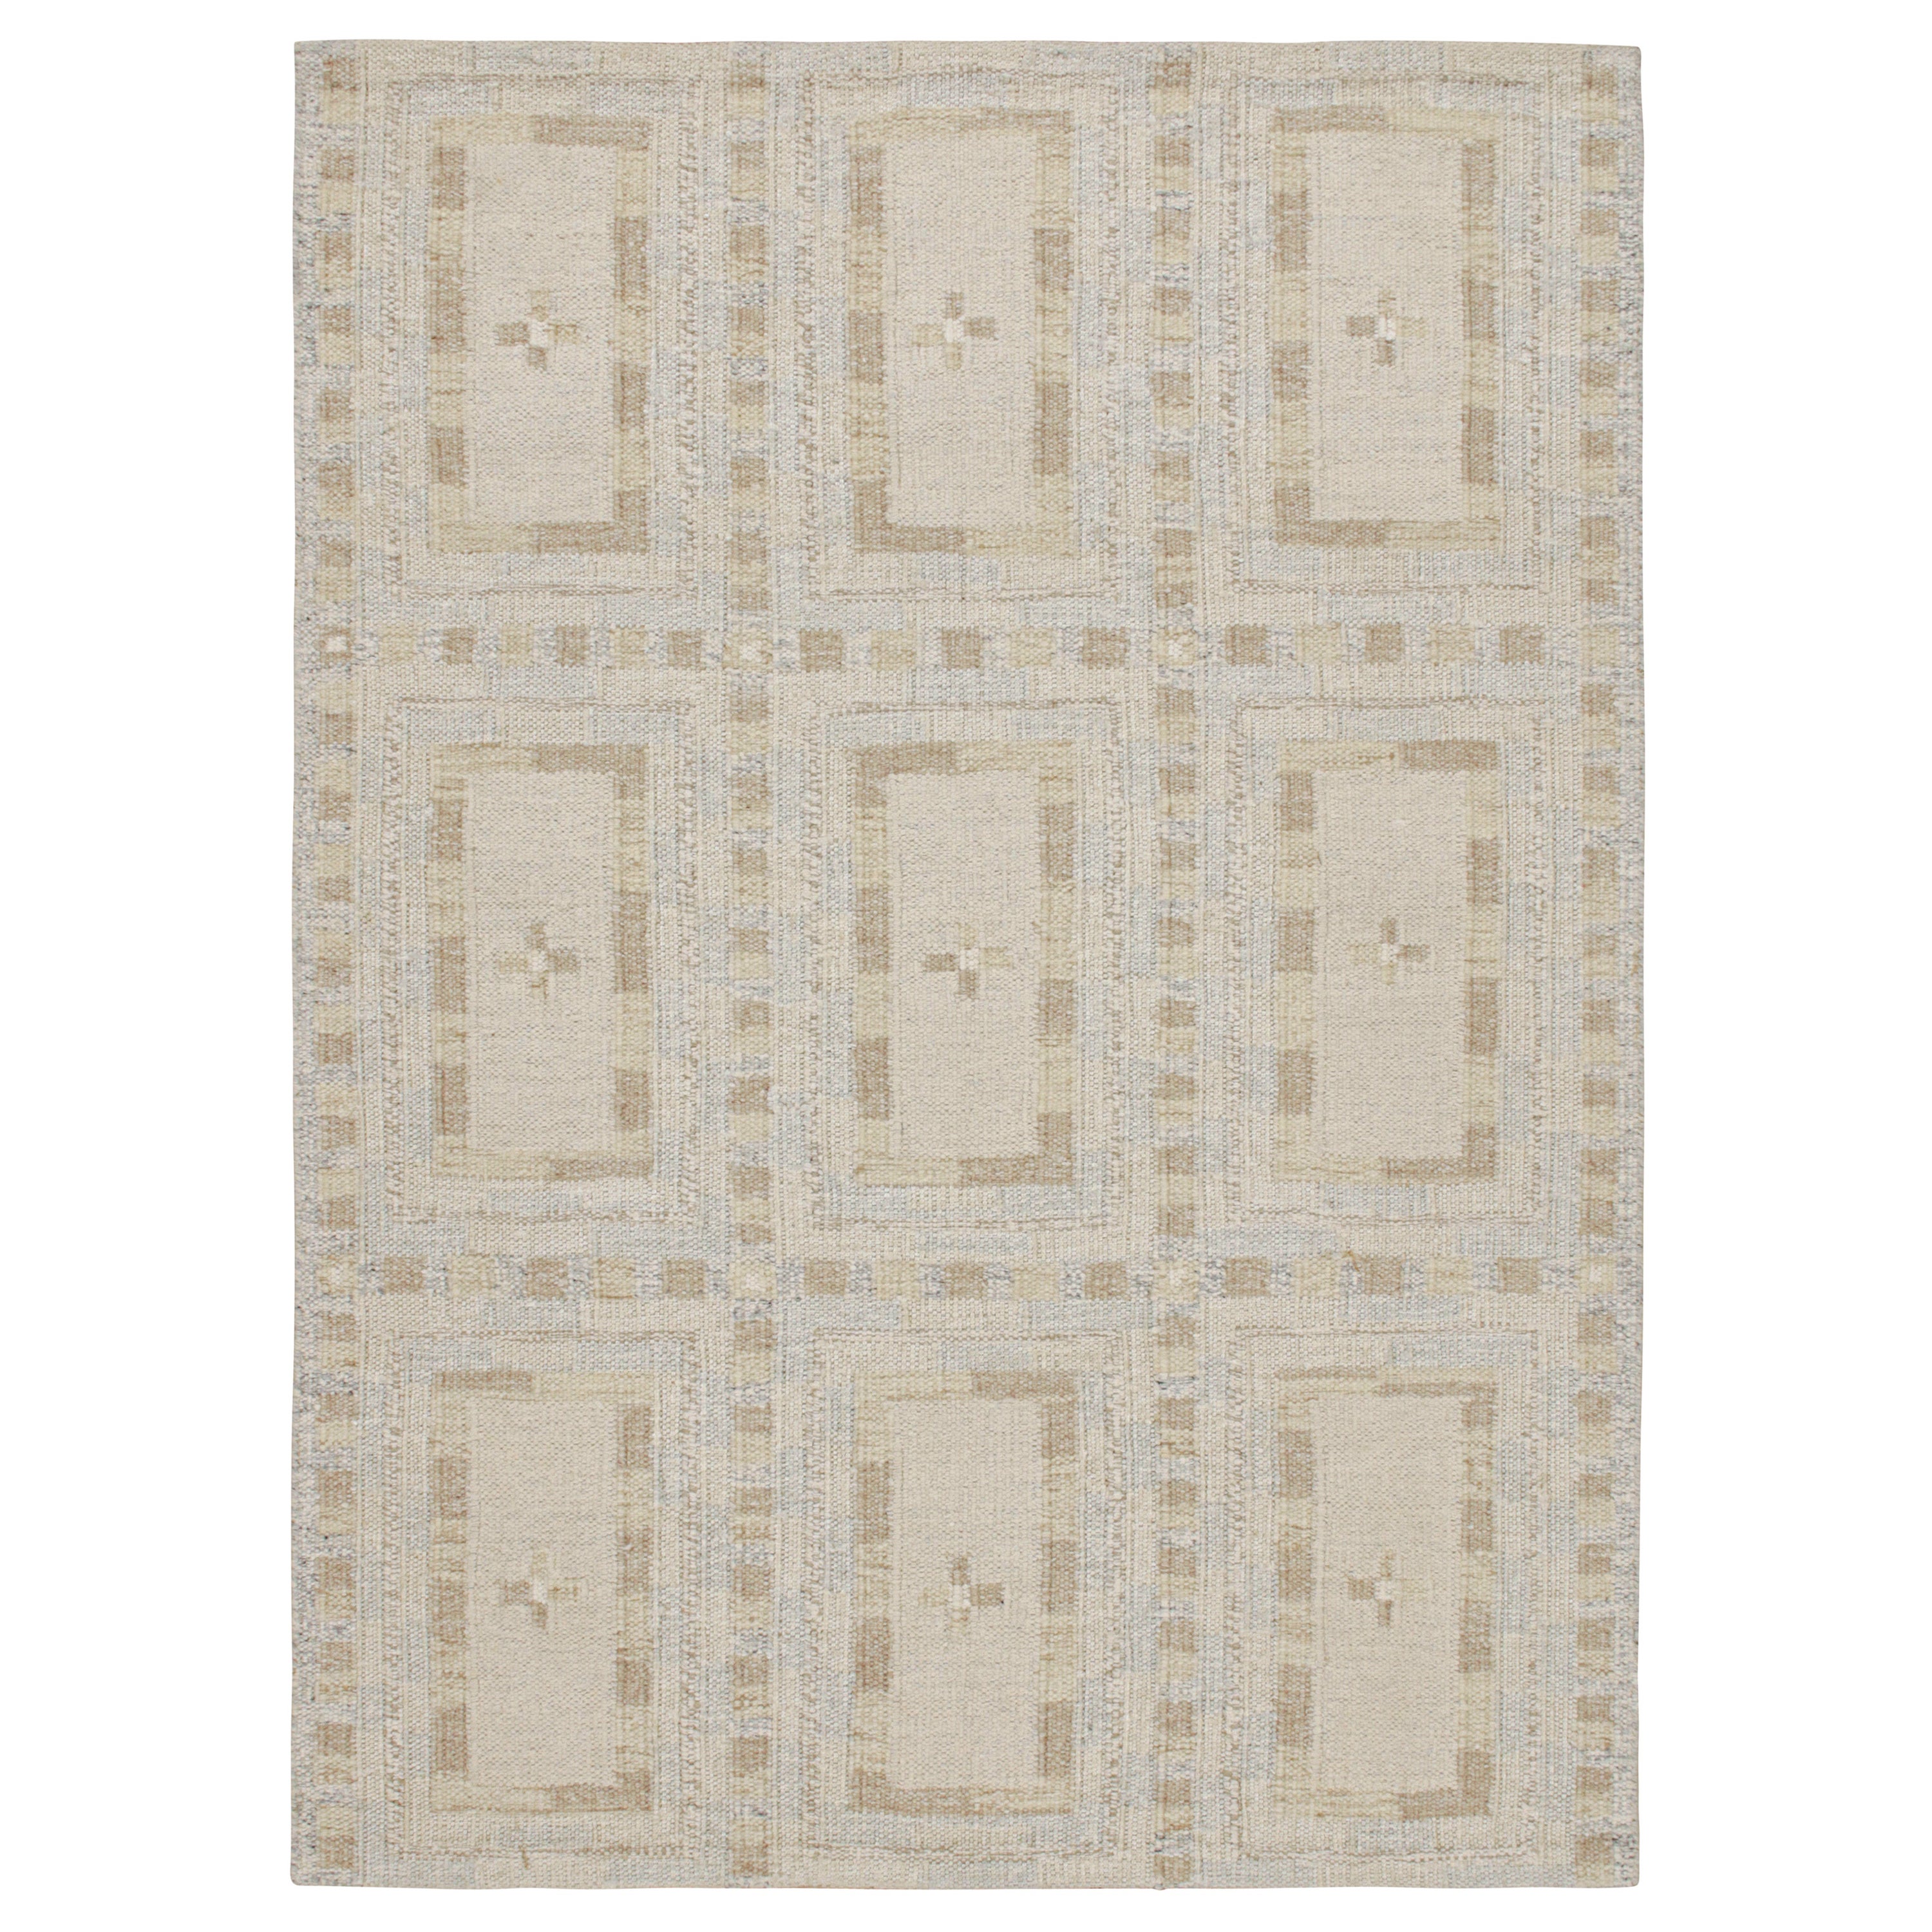 Rug & Kilim’s Scandinavian Style Kilim in White with Beige Geometric Patterns For Sale